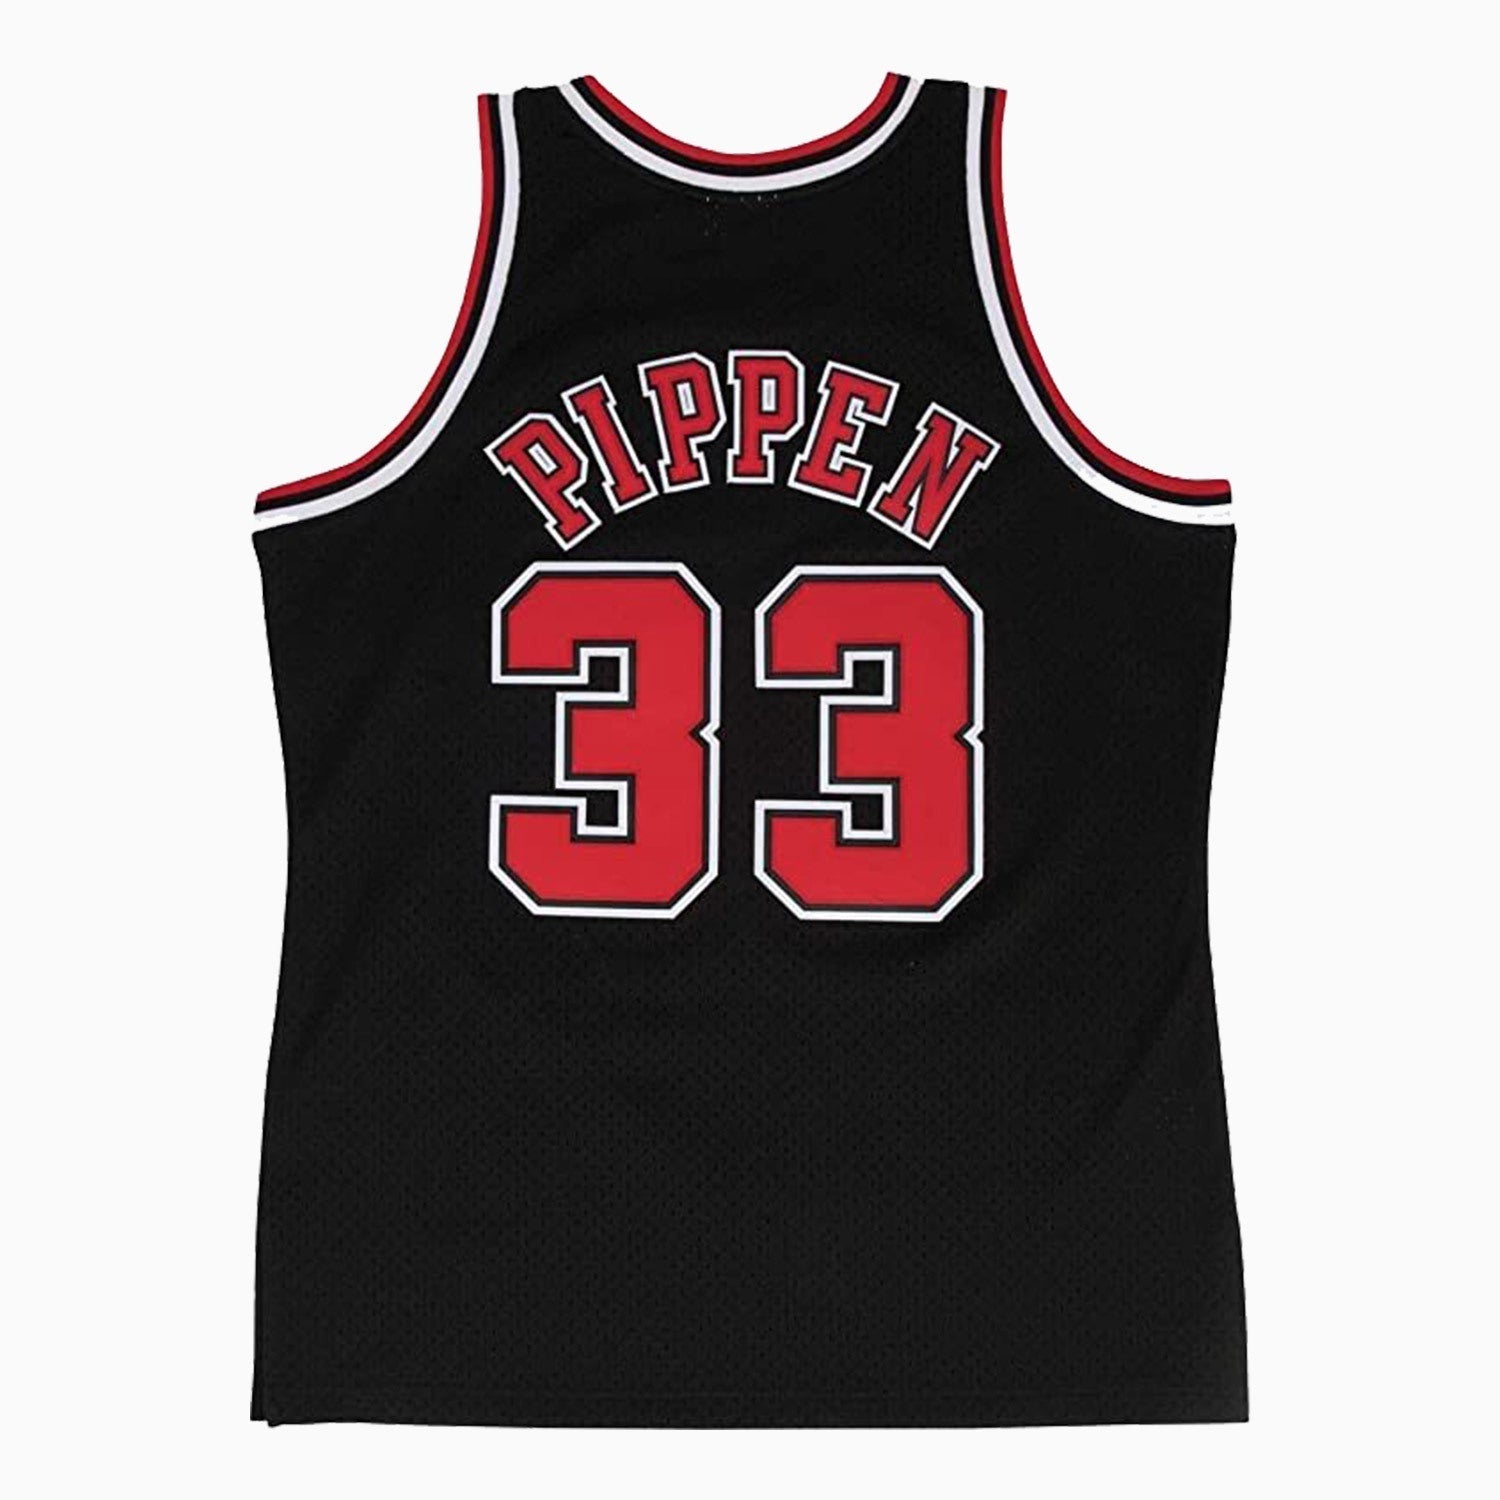 mitchell-and-ness-swingman-scottie-pippen-chicago-bulls-nba-1997-98-jersey-youth-9n2b7blt0-bulsp-y97